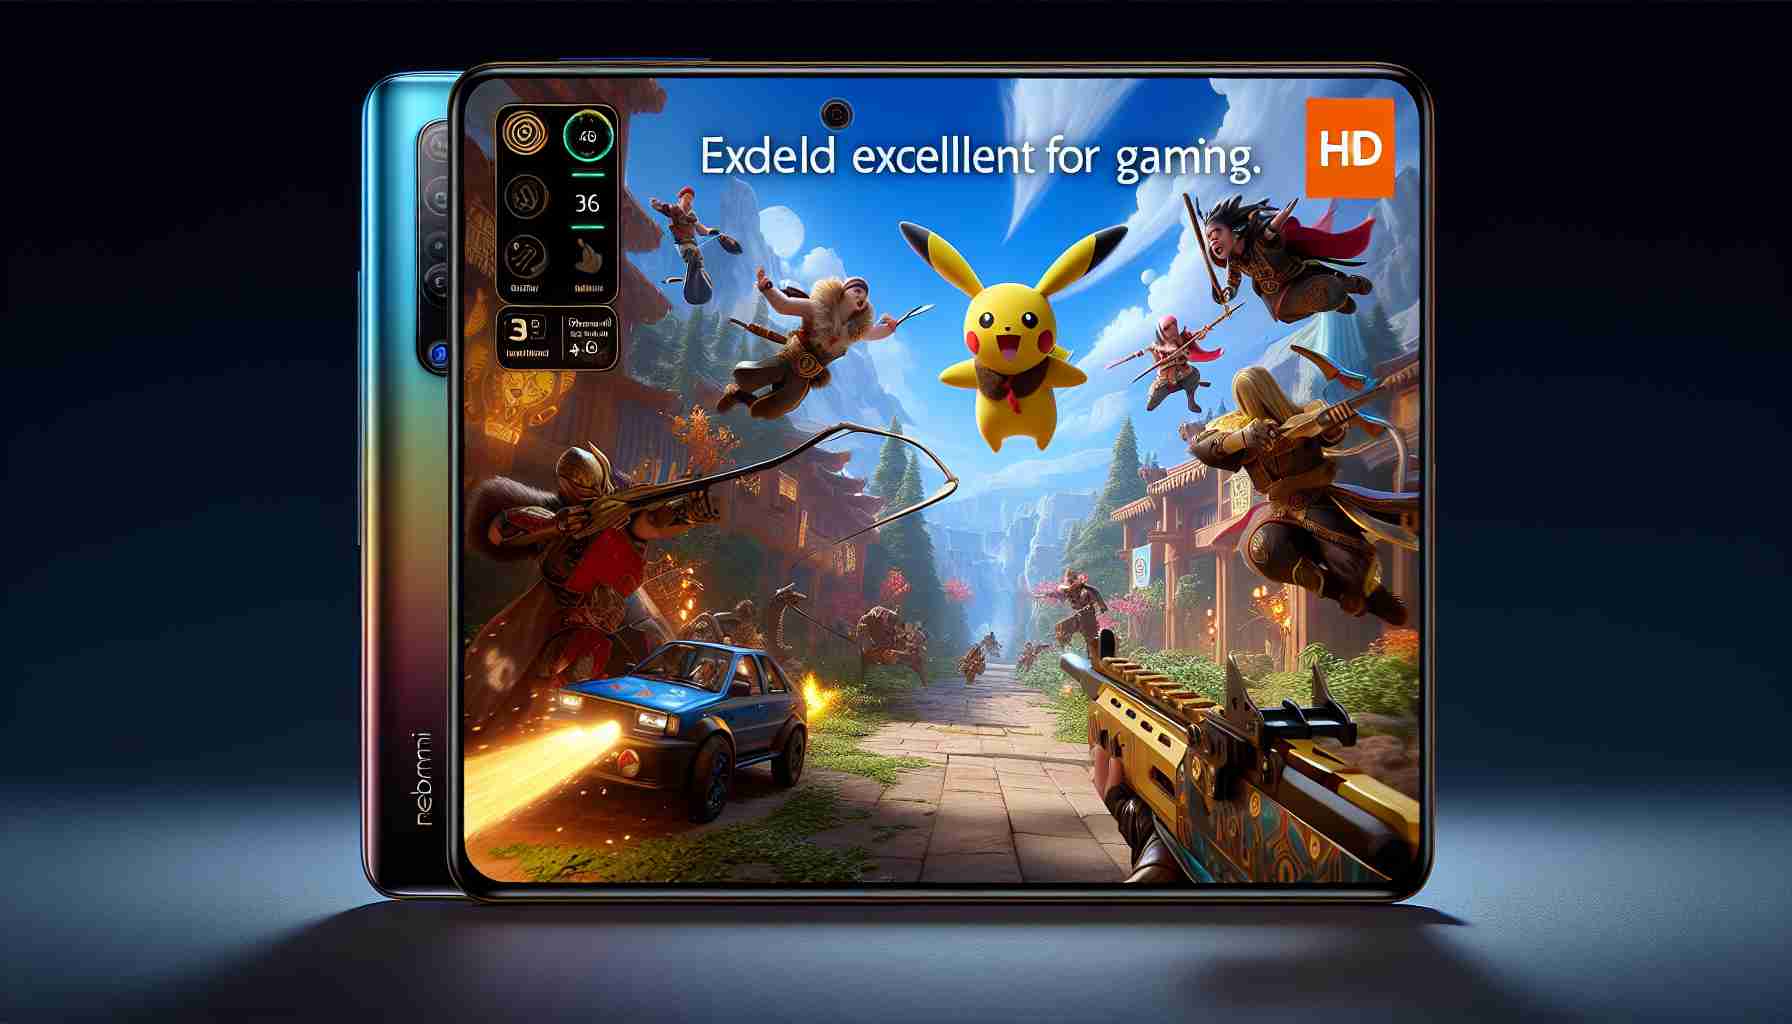 On The Go: High End Games on Budget Smartphones - Gaming Central